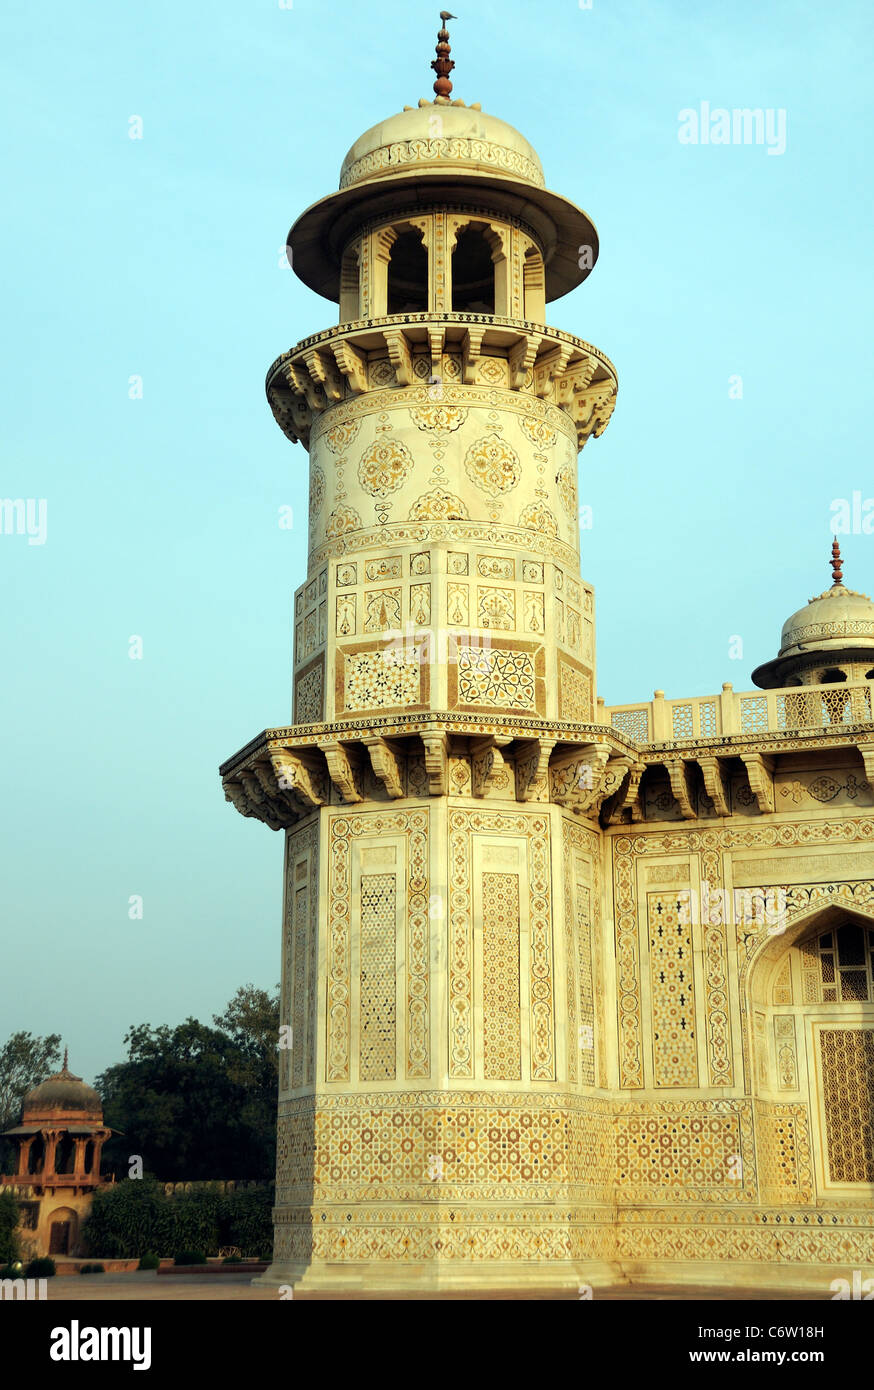 Highly ornate white marble tower at the  Tomb of Itimad ud Daulah whose name was Mirza Ghiyas Beg and his wife Asmat Begum. Agra Stock Photo